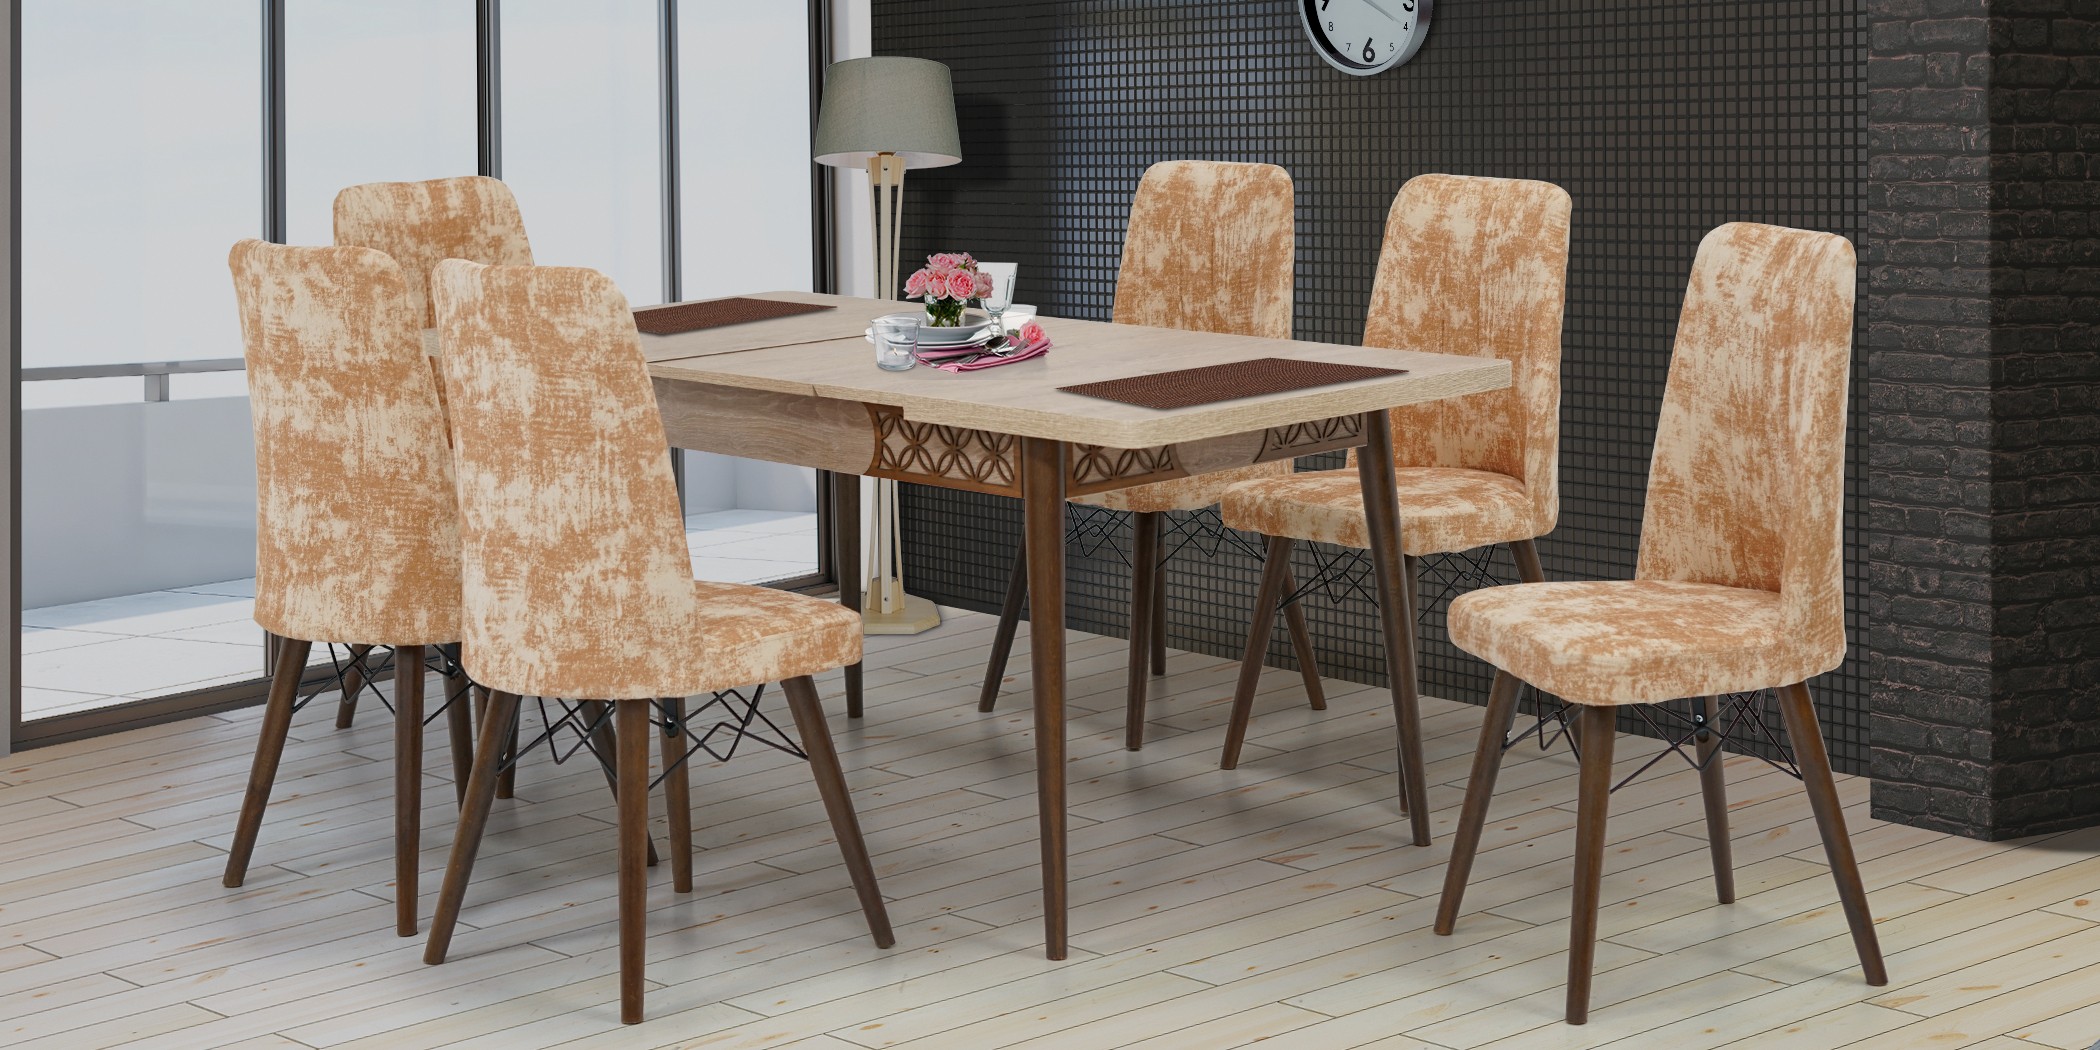 Yara Table+6 chairs (Extendable) 80x170 Beige